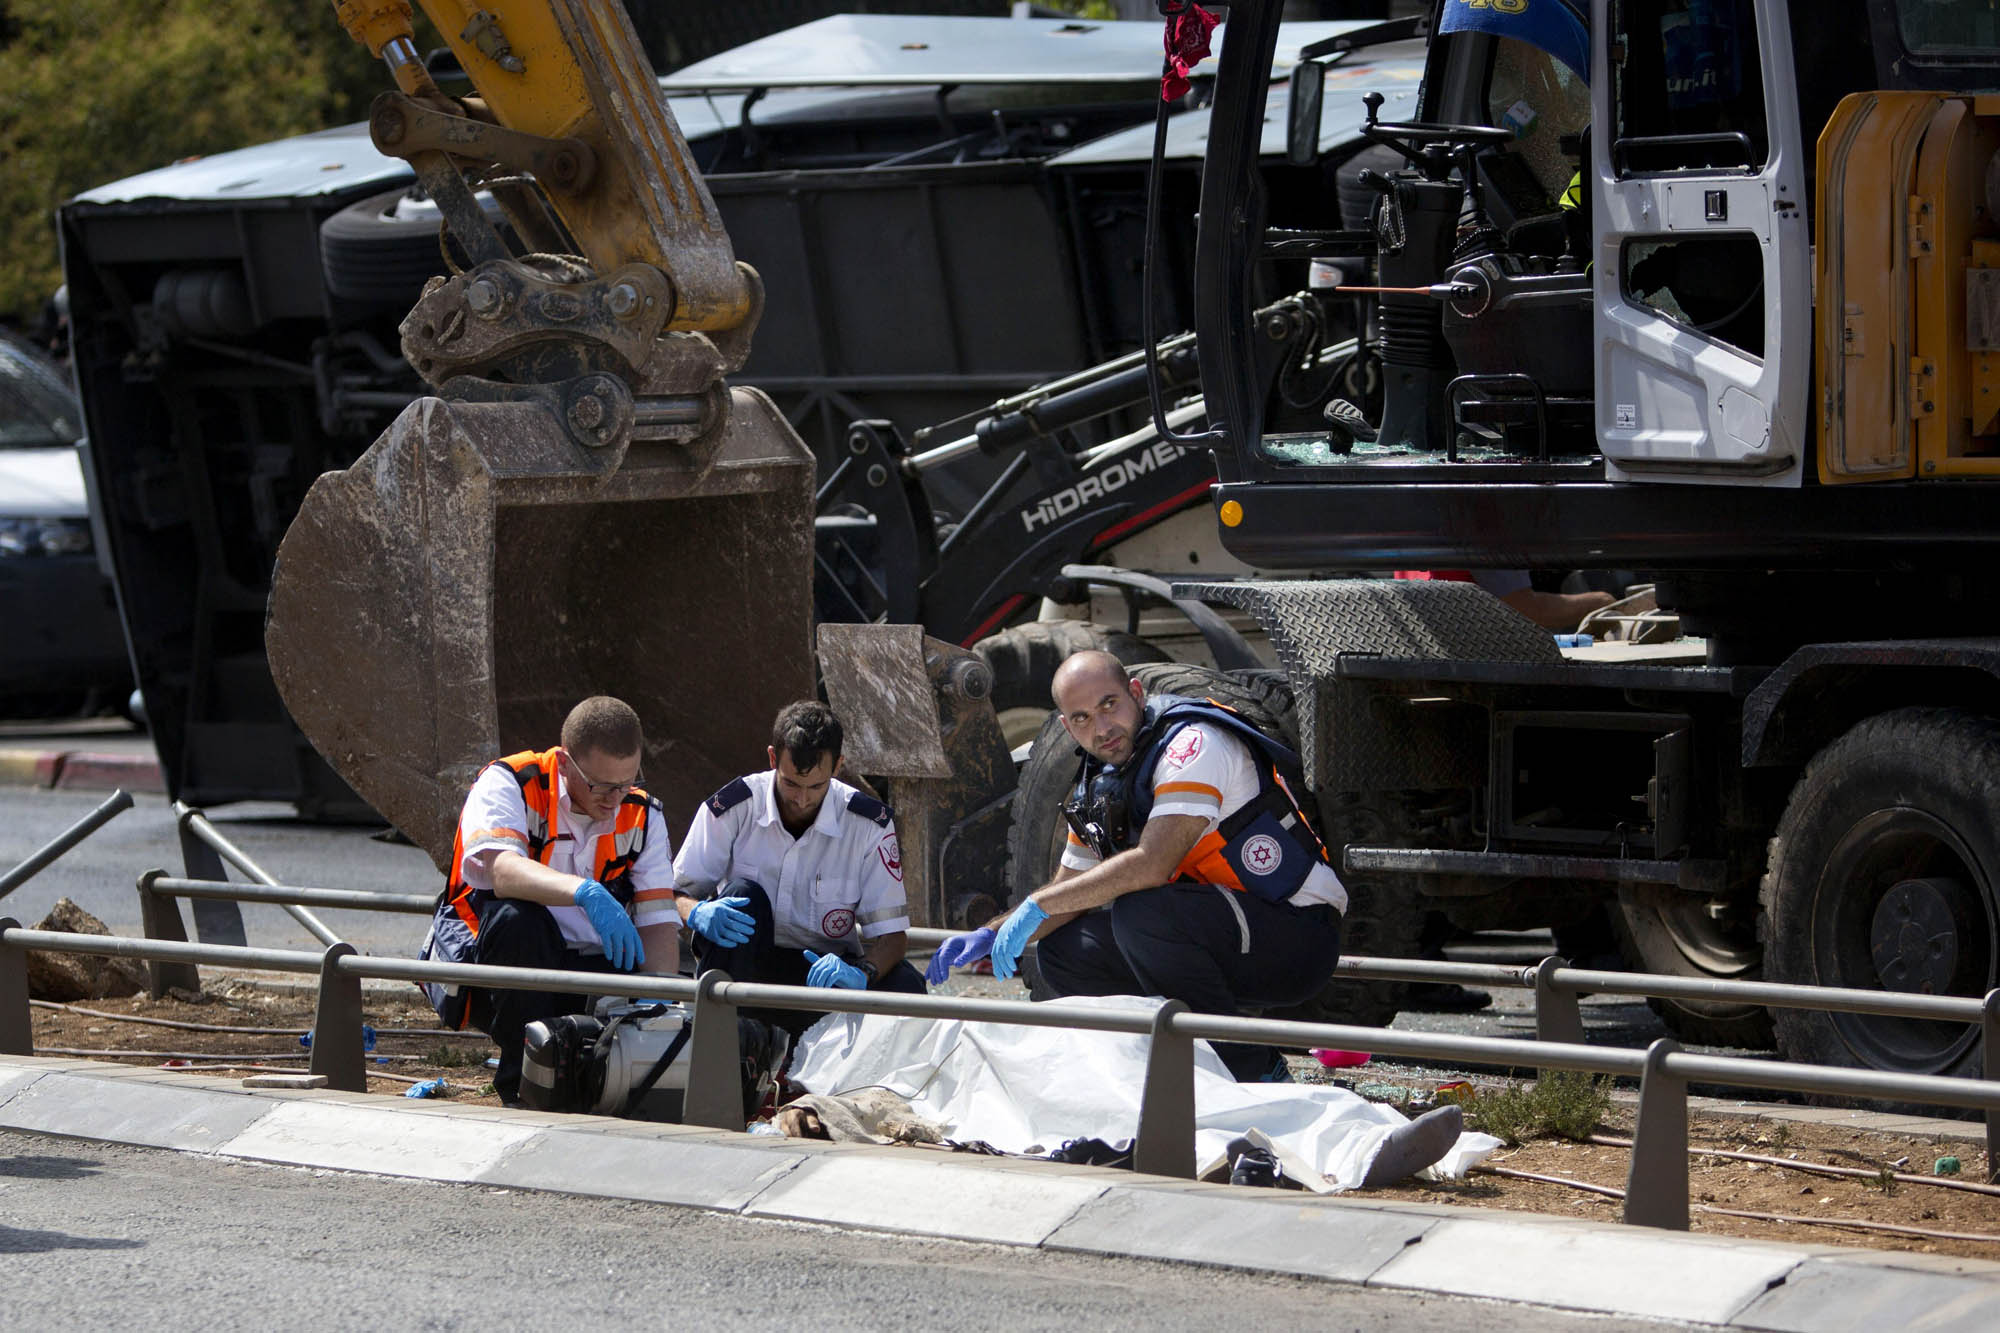 Israeli medics inspect a body at the scene of an attack in Jerusalem, Aug. 4, 2014.